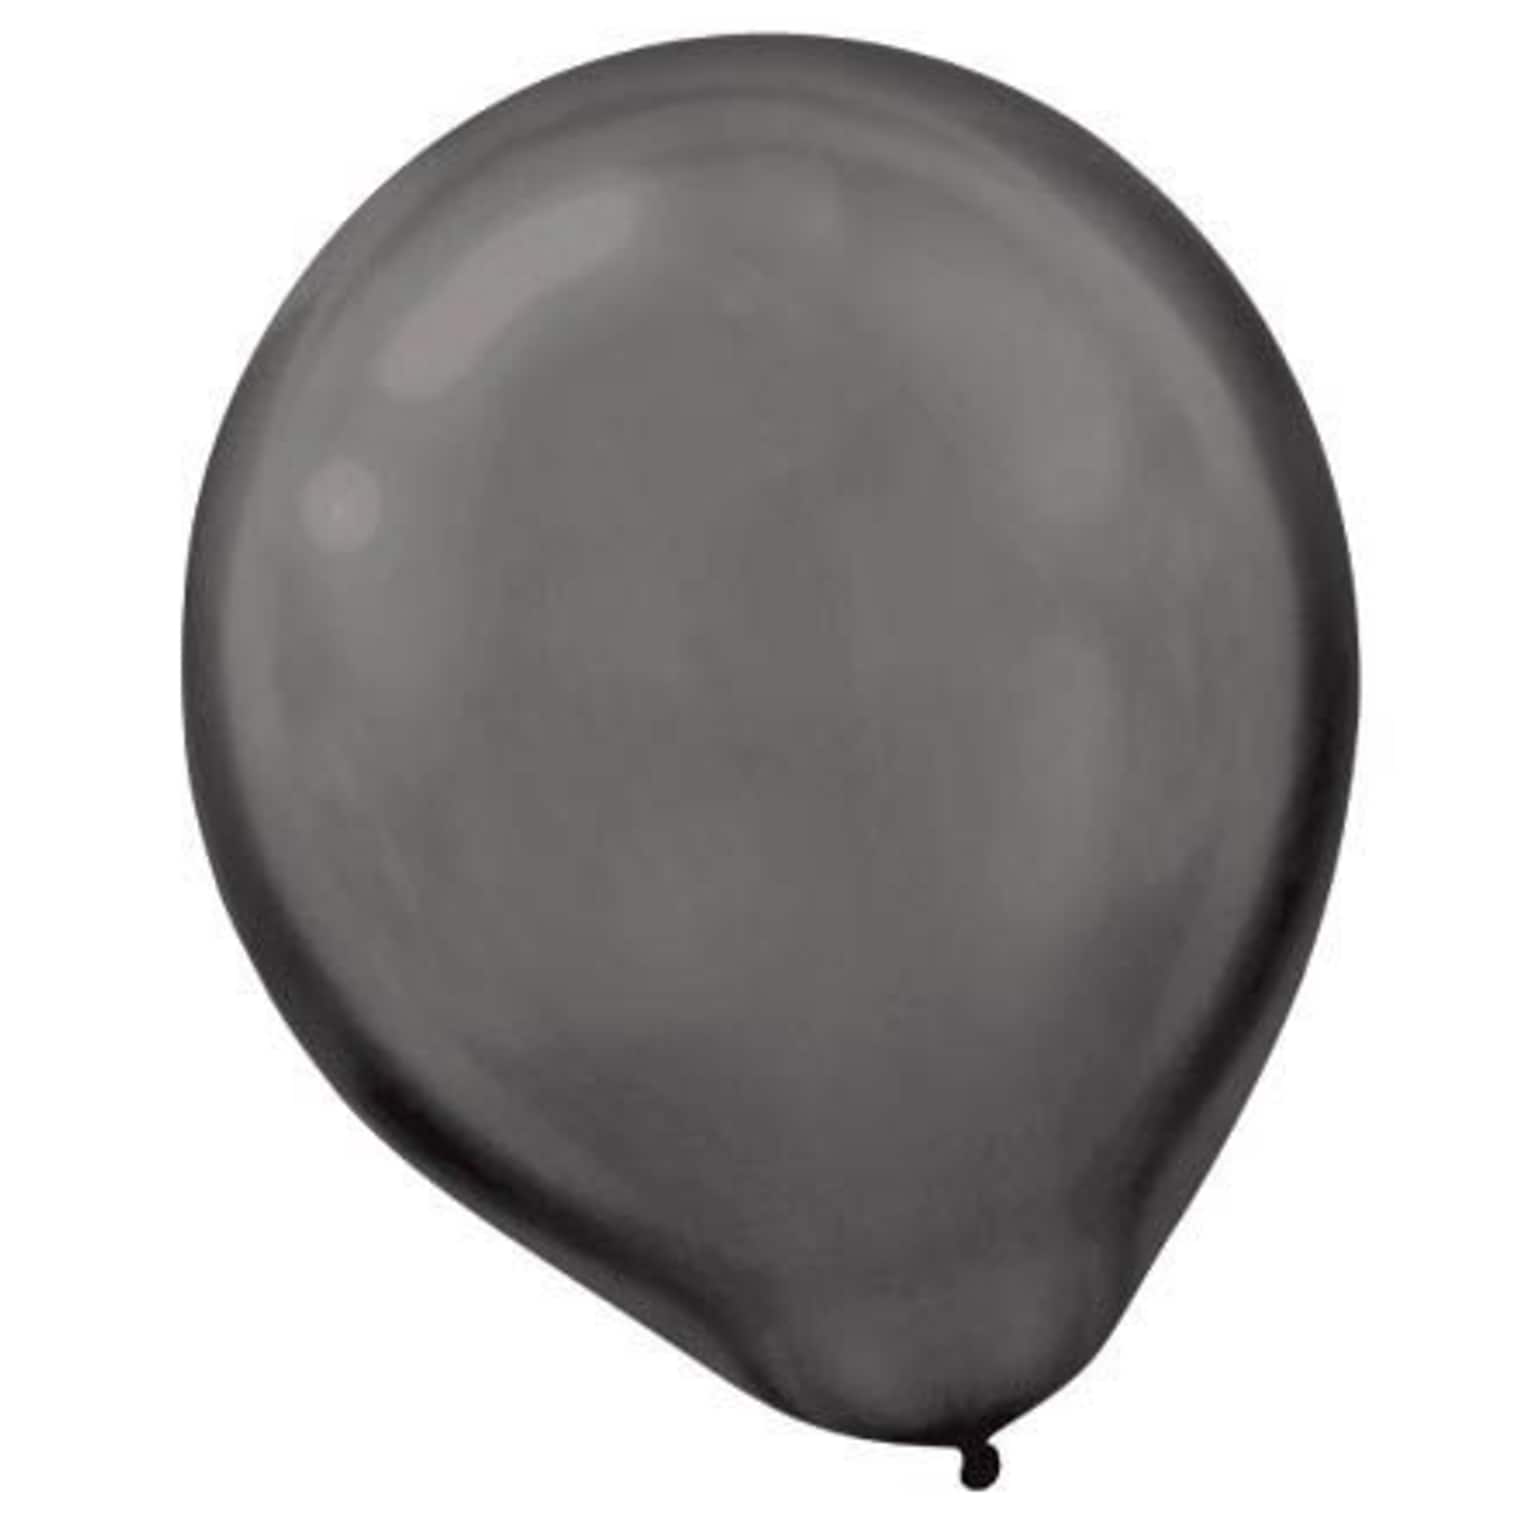 Amscan Pearlized Latex Balloons Packaged, 12, 3/Pack, Black, 72 Per Pack (113251.1)